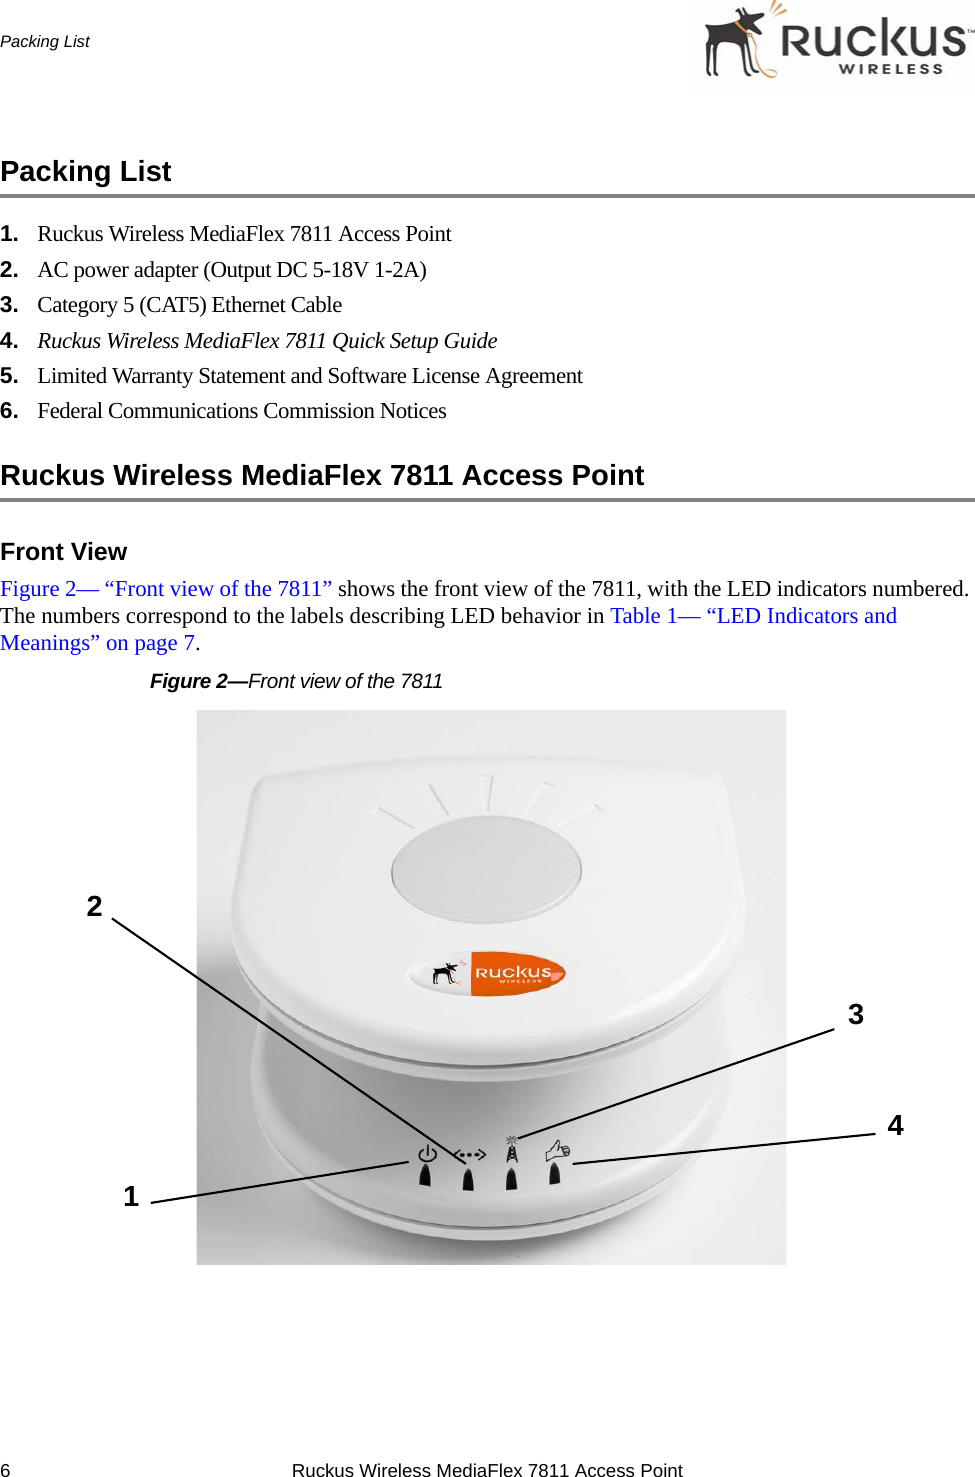 6 Ruckus Wireless MediaFlex 7811 Access PointPacking ListPacking List1. Ruckus Wireless MediaFlex 7811 Access Point2. AC power adapter (Output DC 5-18V 1-2A)3. Category 5 (CAT5) Ethernet Cable4. Ruckus Wireless MediaFlex 7811 Quick Setup Guide5. Limited Warranty Statement and Software License Agreement6. Federal Communications Commission NoticesRuckus Wireless MediaFlex 7811 Access PointFront ViewFigure 2— “Front view of the 7811” shows the front view of the 7811, with the LED indicators numbered. The numbers correspond to the labels describing LED behavior in Table 1— “LED Indicators and Meanings” on page 7.Figure 2—Front view of the 7811 2134